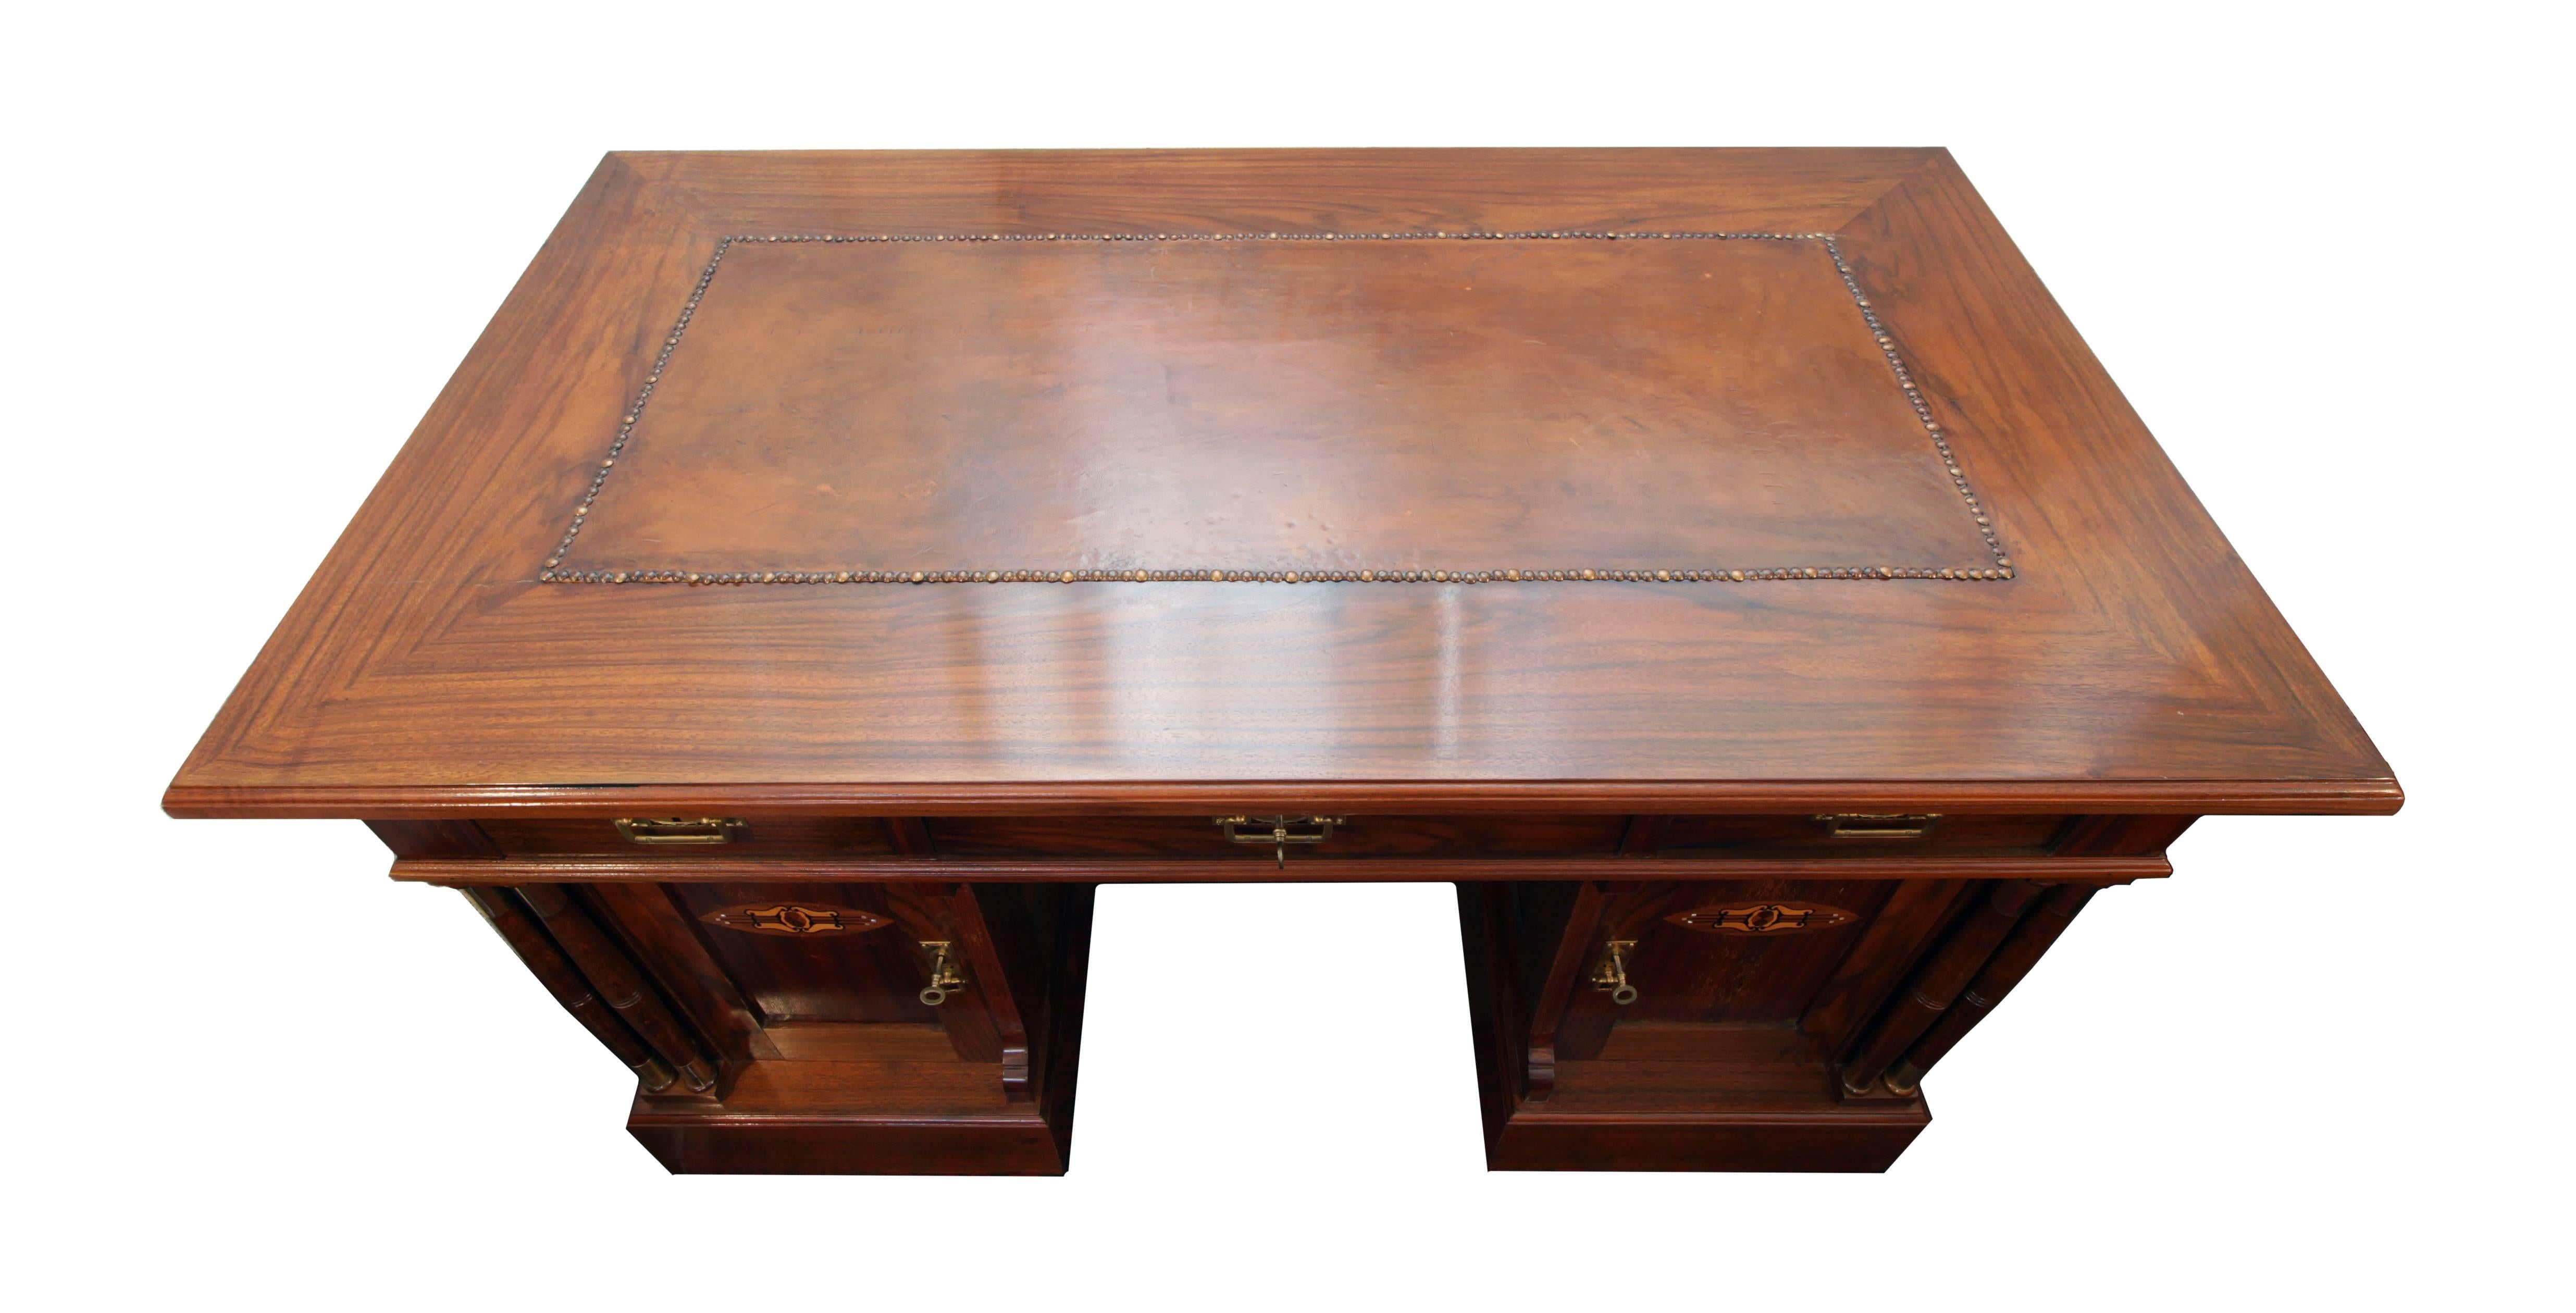 Very nice desk from the time of Art Nouveau. The Desk can be centered. The desk was made around 1900 of walnut wood on a pinewood body.
The desk can be split into 3 parts: 2 gondolas and a writing board. Writing pad was upholstered with